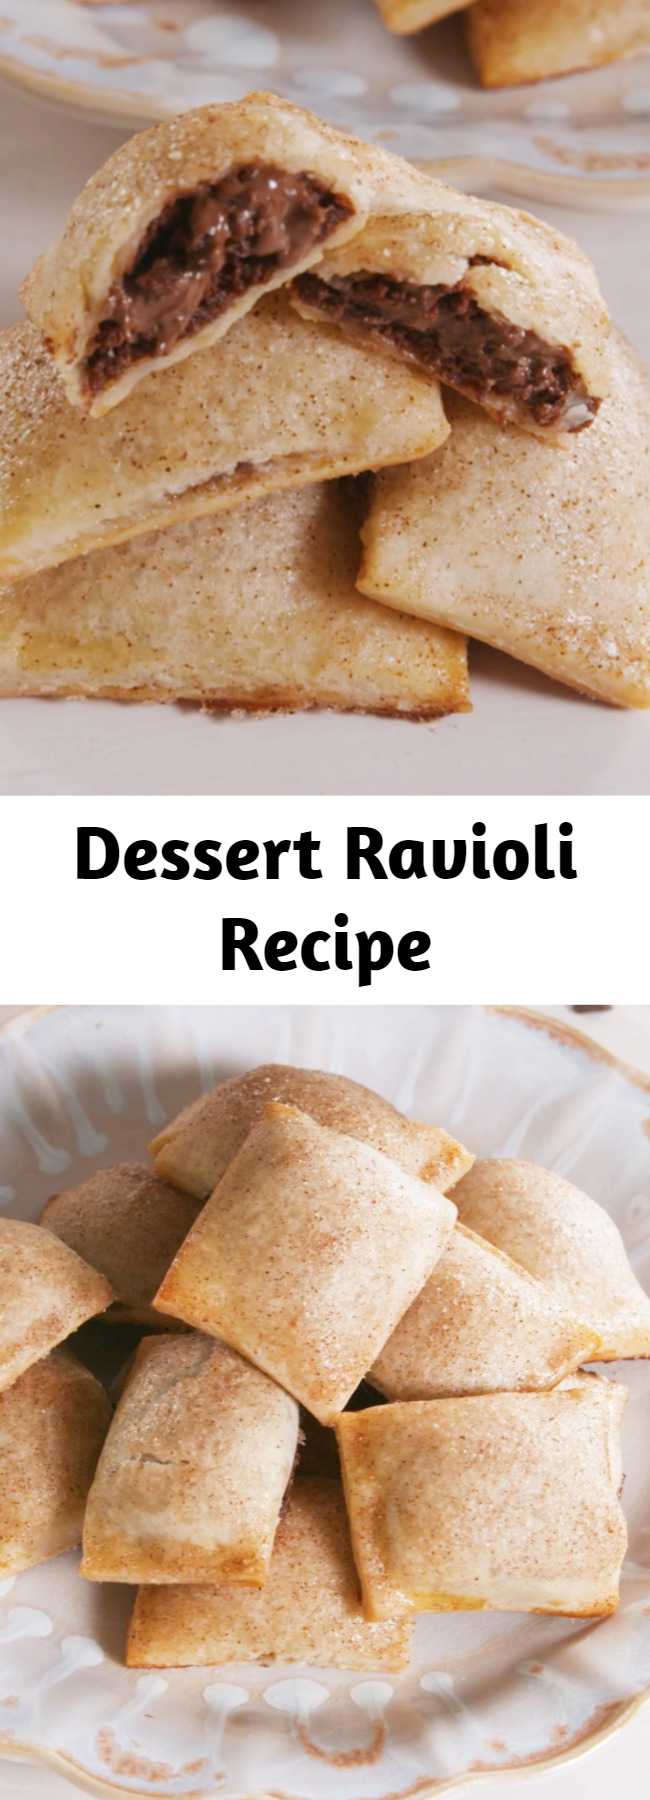 Dessert Ravioli Recipe - How genius is this method?! You can fill these "ravioli" with all sorts of things, from fruit fillings to peanut butter and chocolate. We chose Nutella because we're obsessed with it. This Dessert Ravioli is the BEST thing to do with Nutella. #icecubetrayhacks #piedough #creamcheese #nutella #nutelladesserts #minidesserts